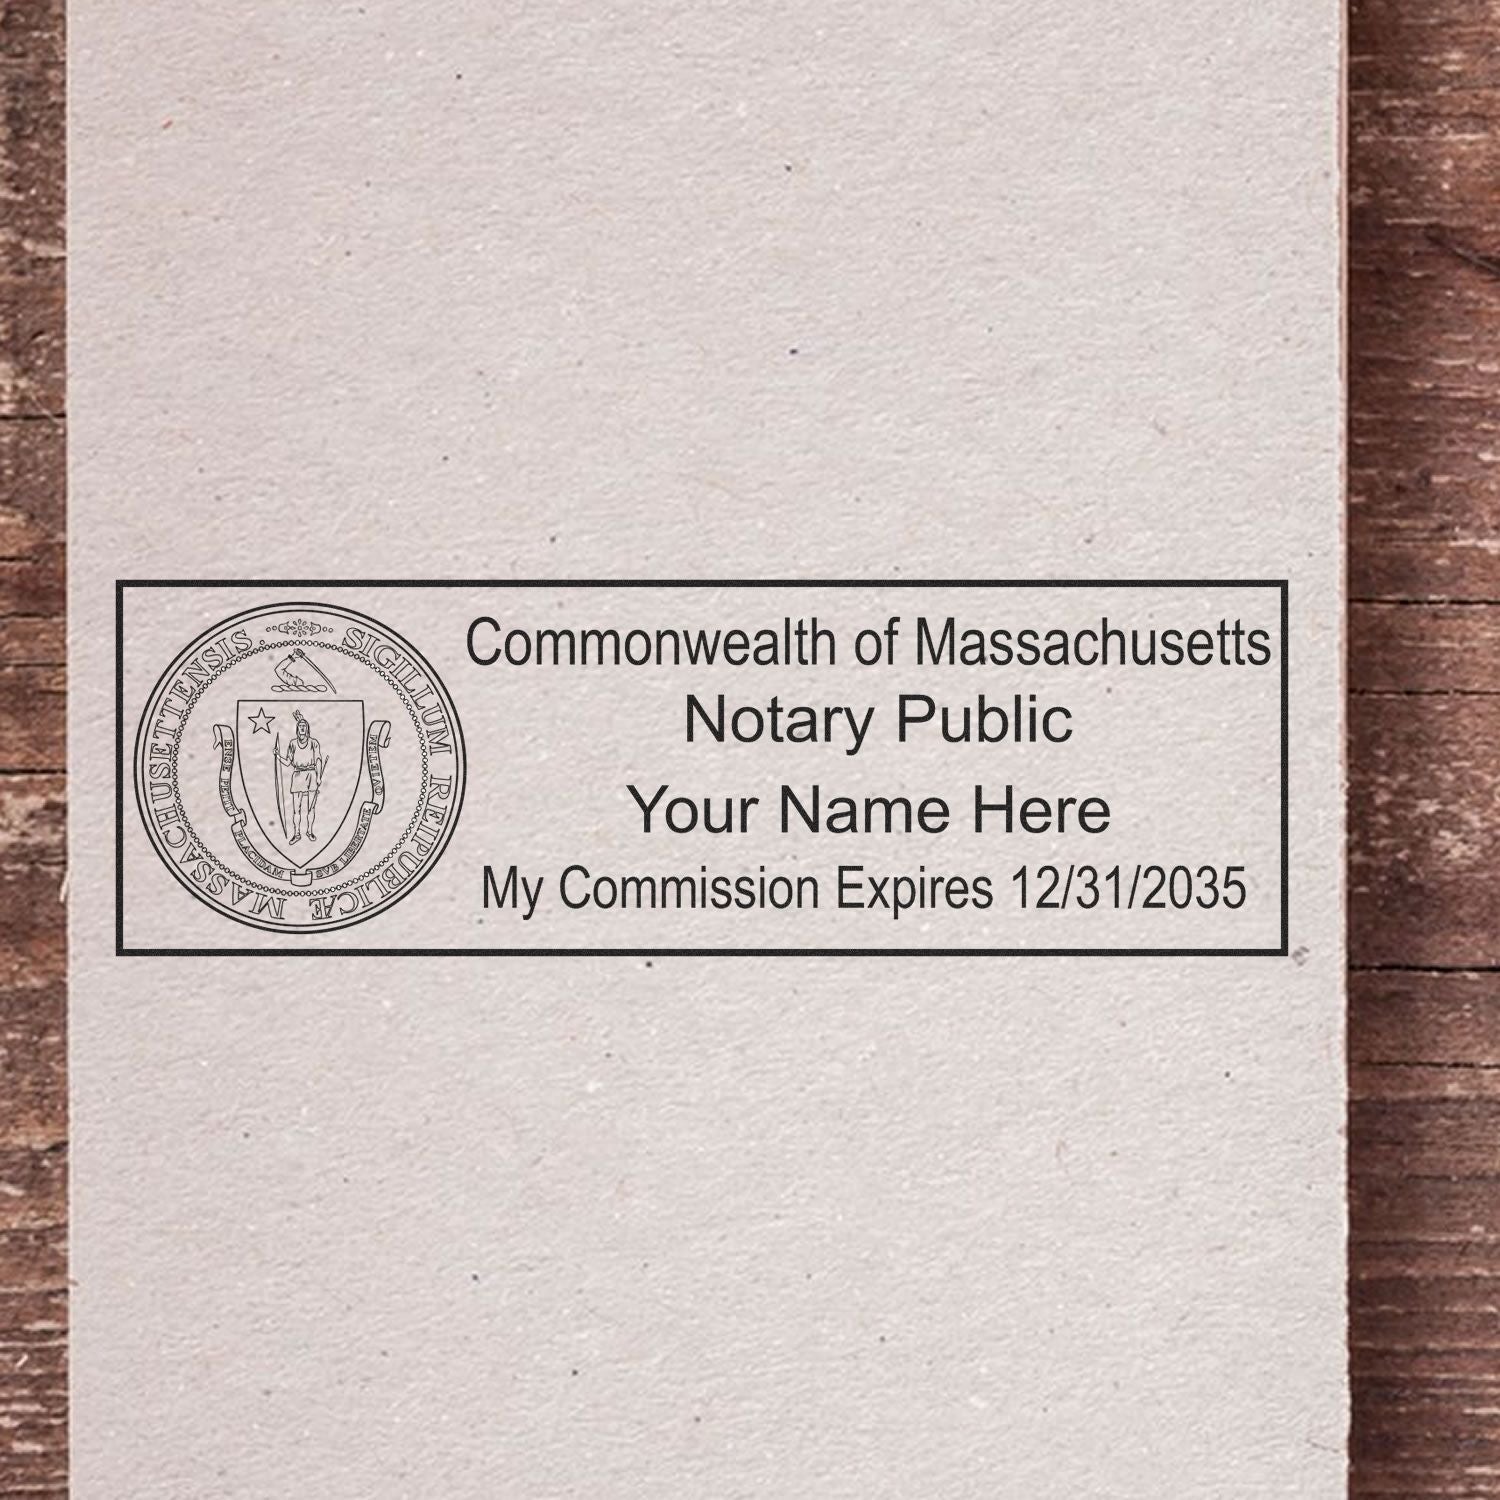 The main image for the Slim Pre-Inked State Seal Notary Stamp for Massachusetts depicting a sample of the imprint and electronic files